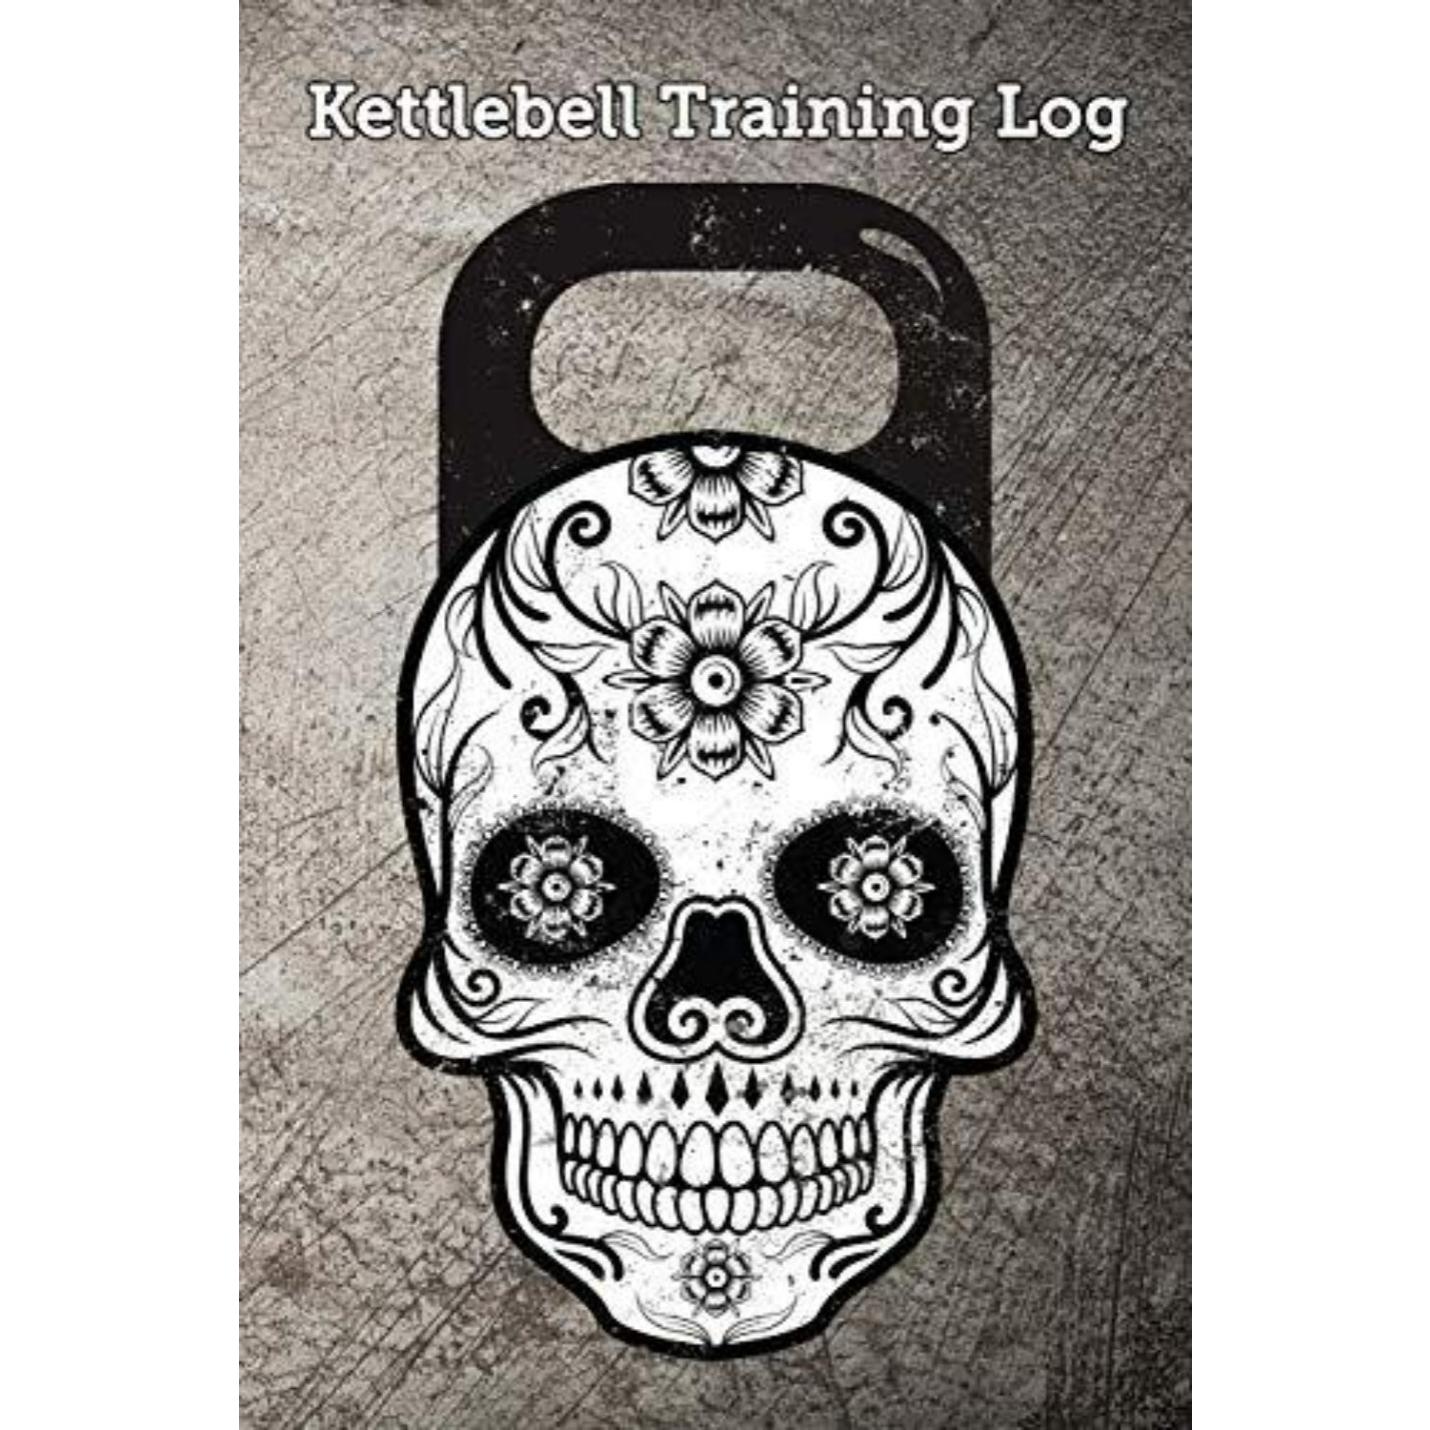 Kettlebell Training Log: Keep Track of Your Workout - happygetfit.com